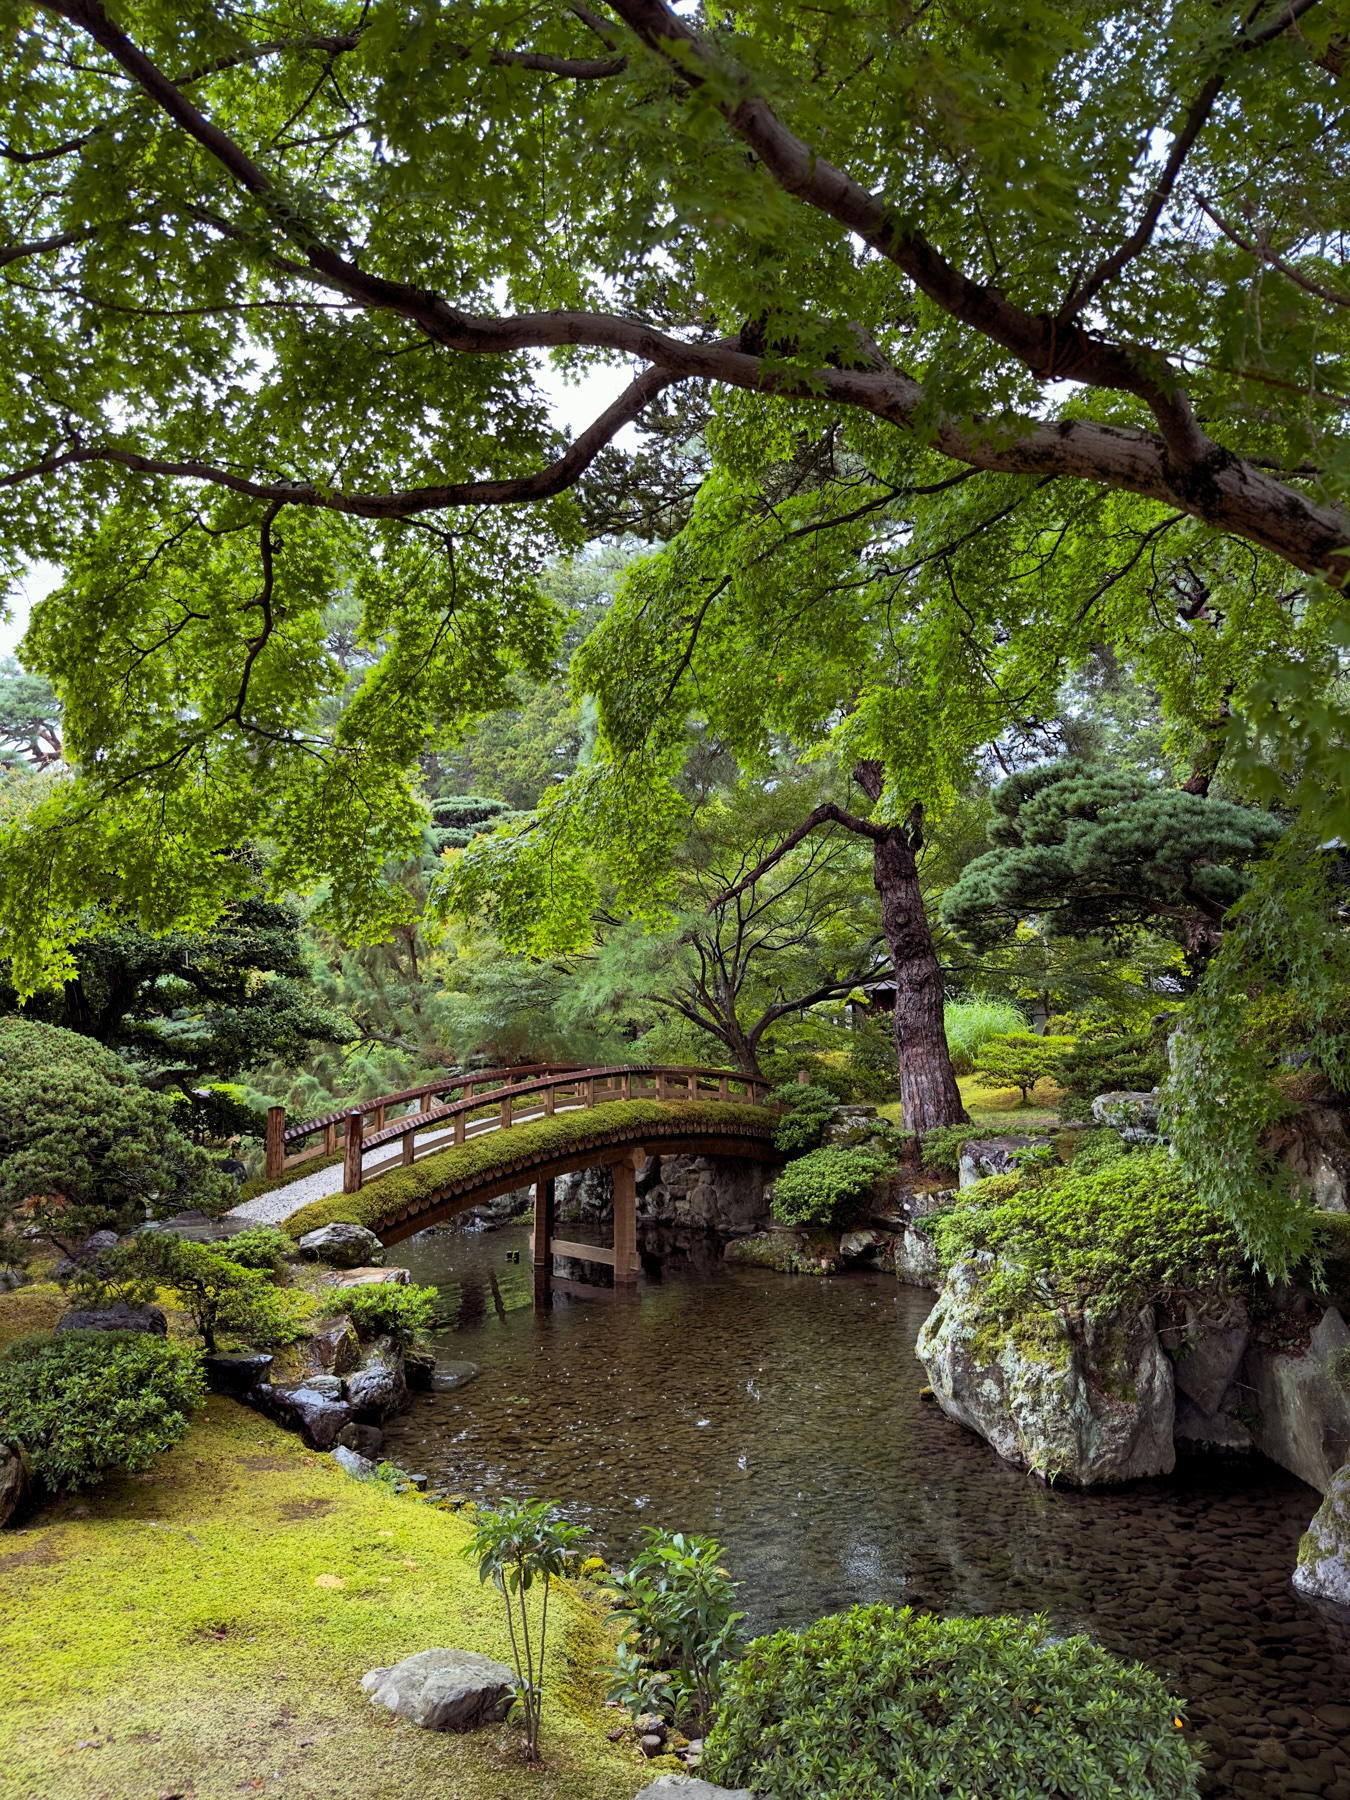 A moss covered wooden bridge and lush trees in the imperial palace gardens